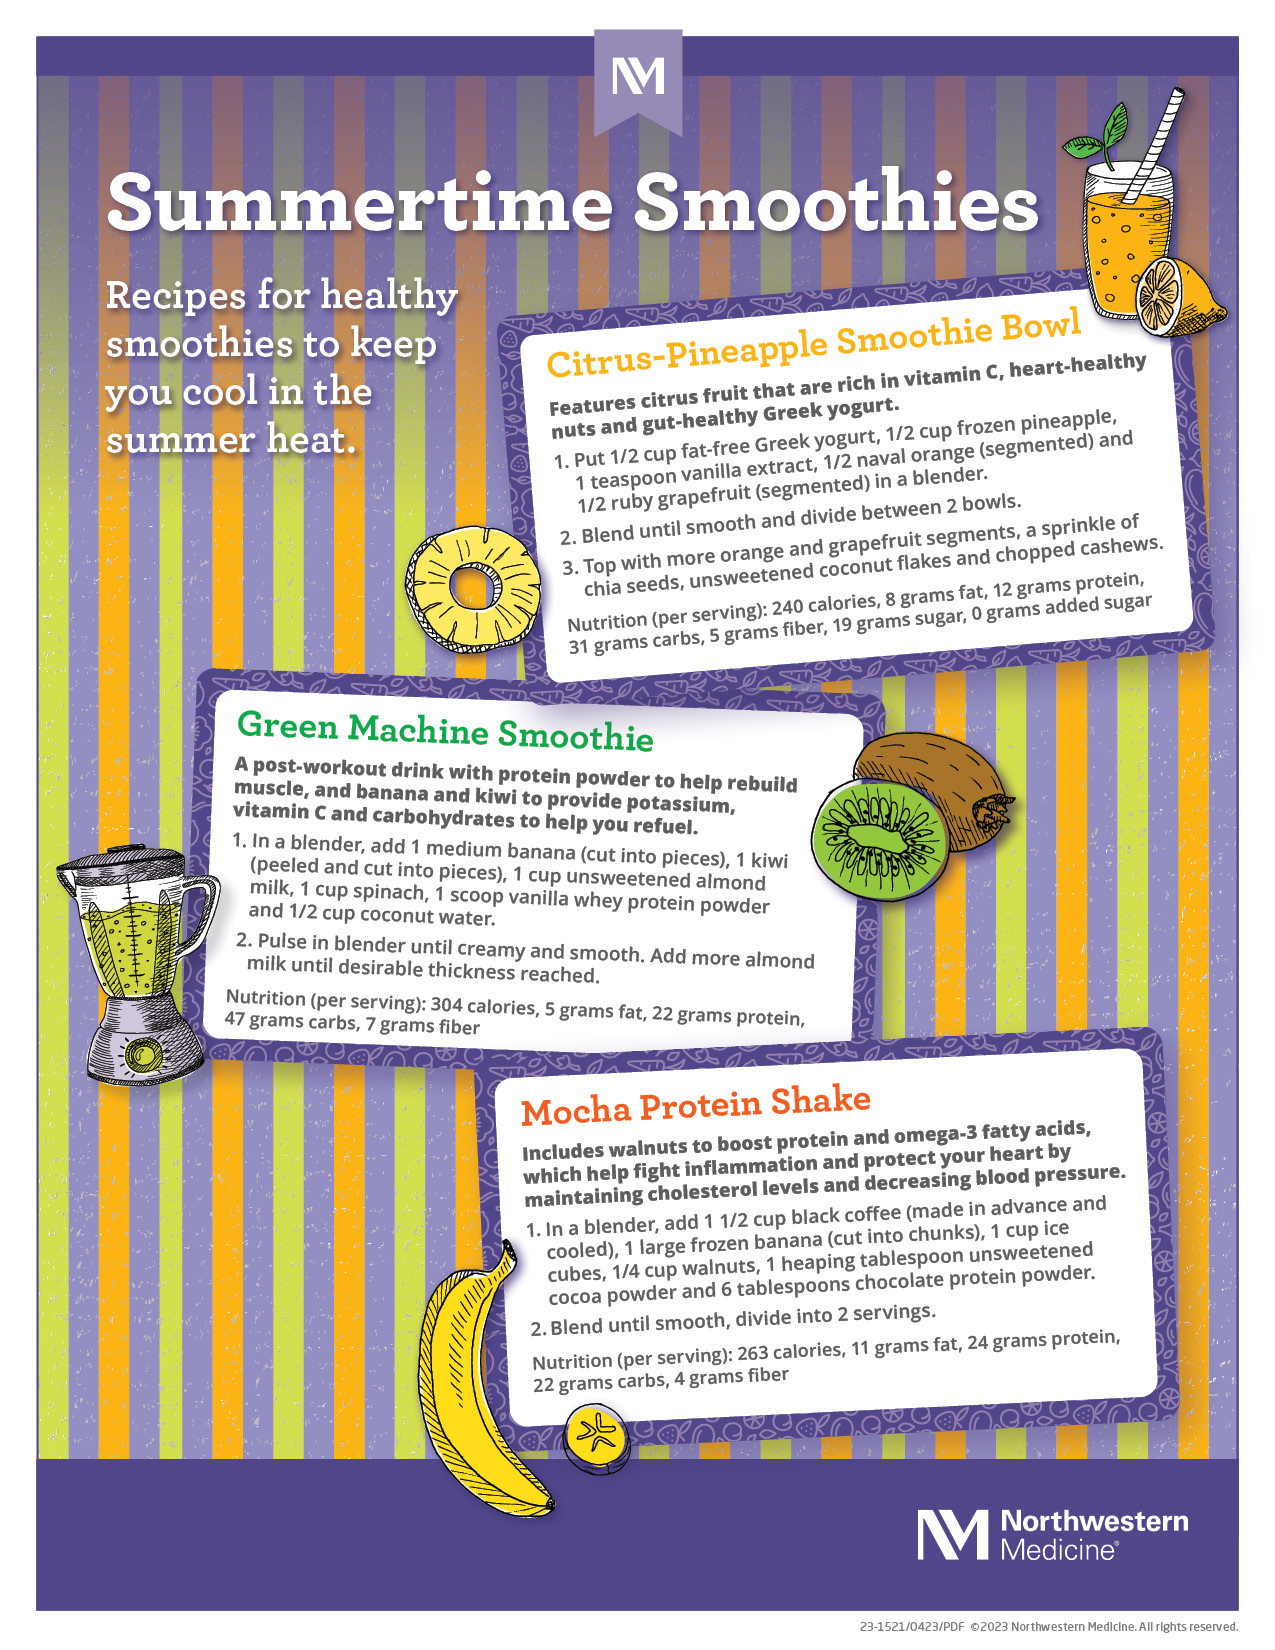 Graphic with the headline, "Summertime Smoothies" and three boxes with recipes for Citrus-Pineapple Smoothie Bowl, Green Machine Smoothie, and Mocha Protein Shake, on a purple, orange and green striped background with illustrations of drinks, a blender and fruit.